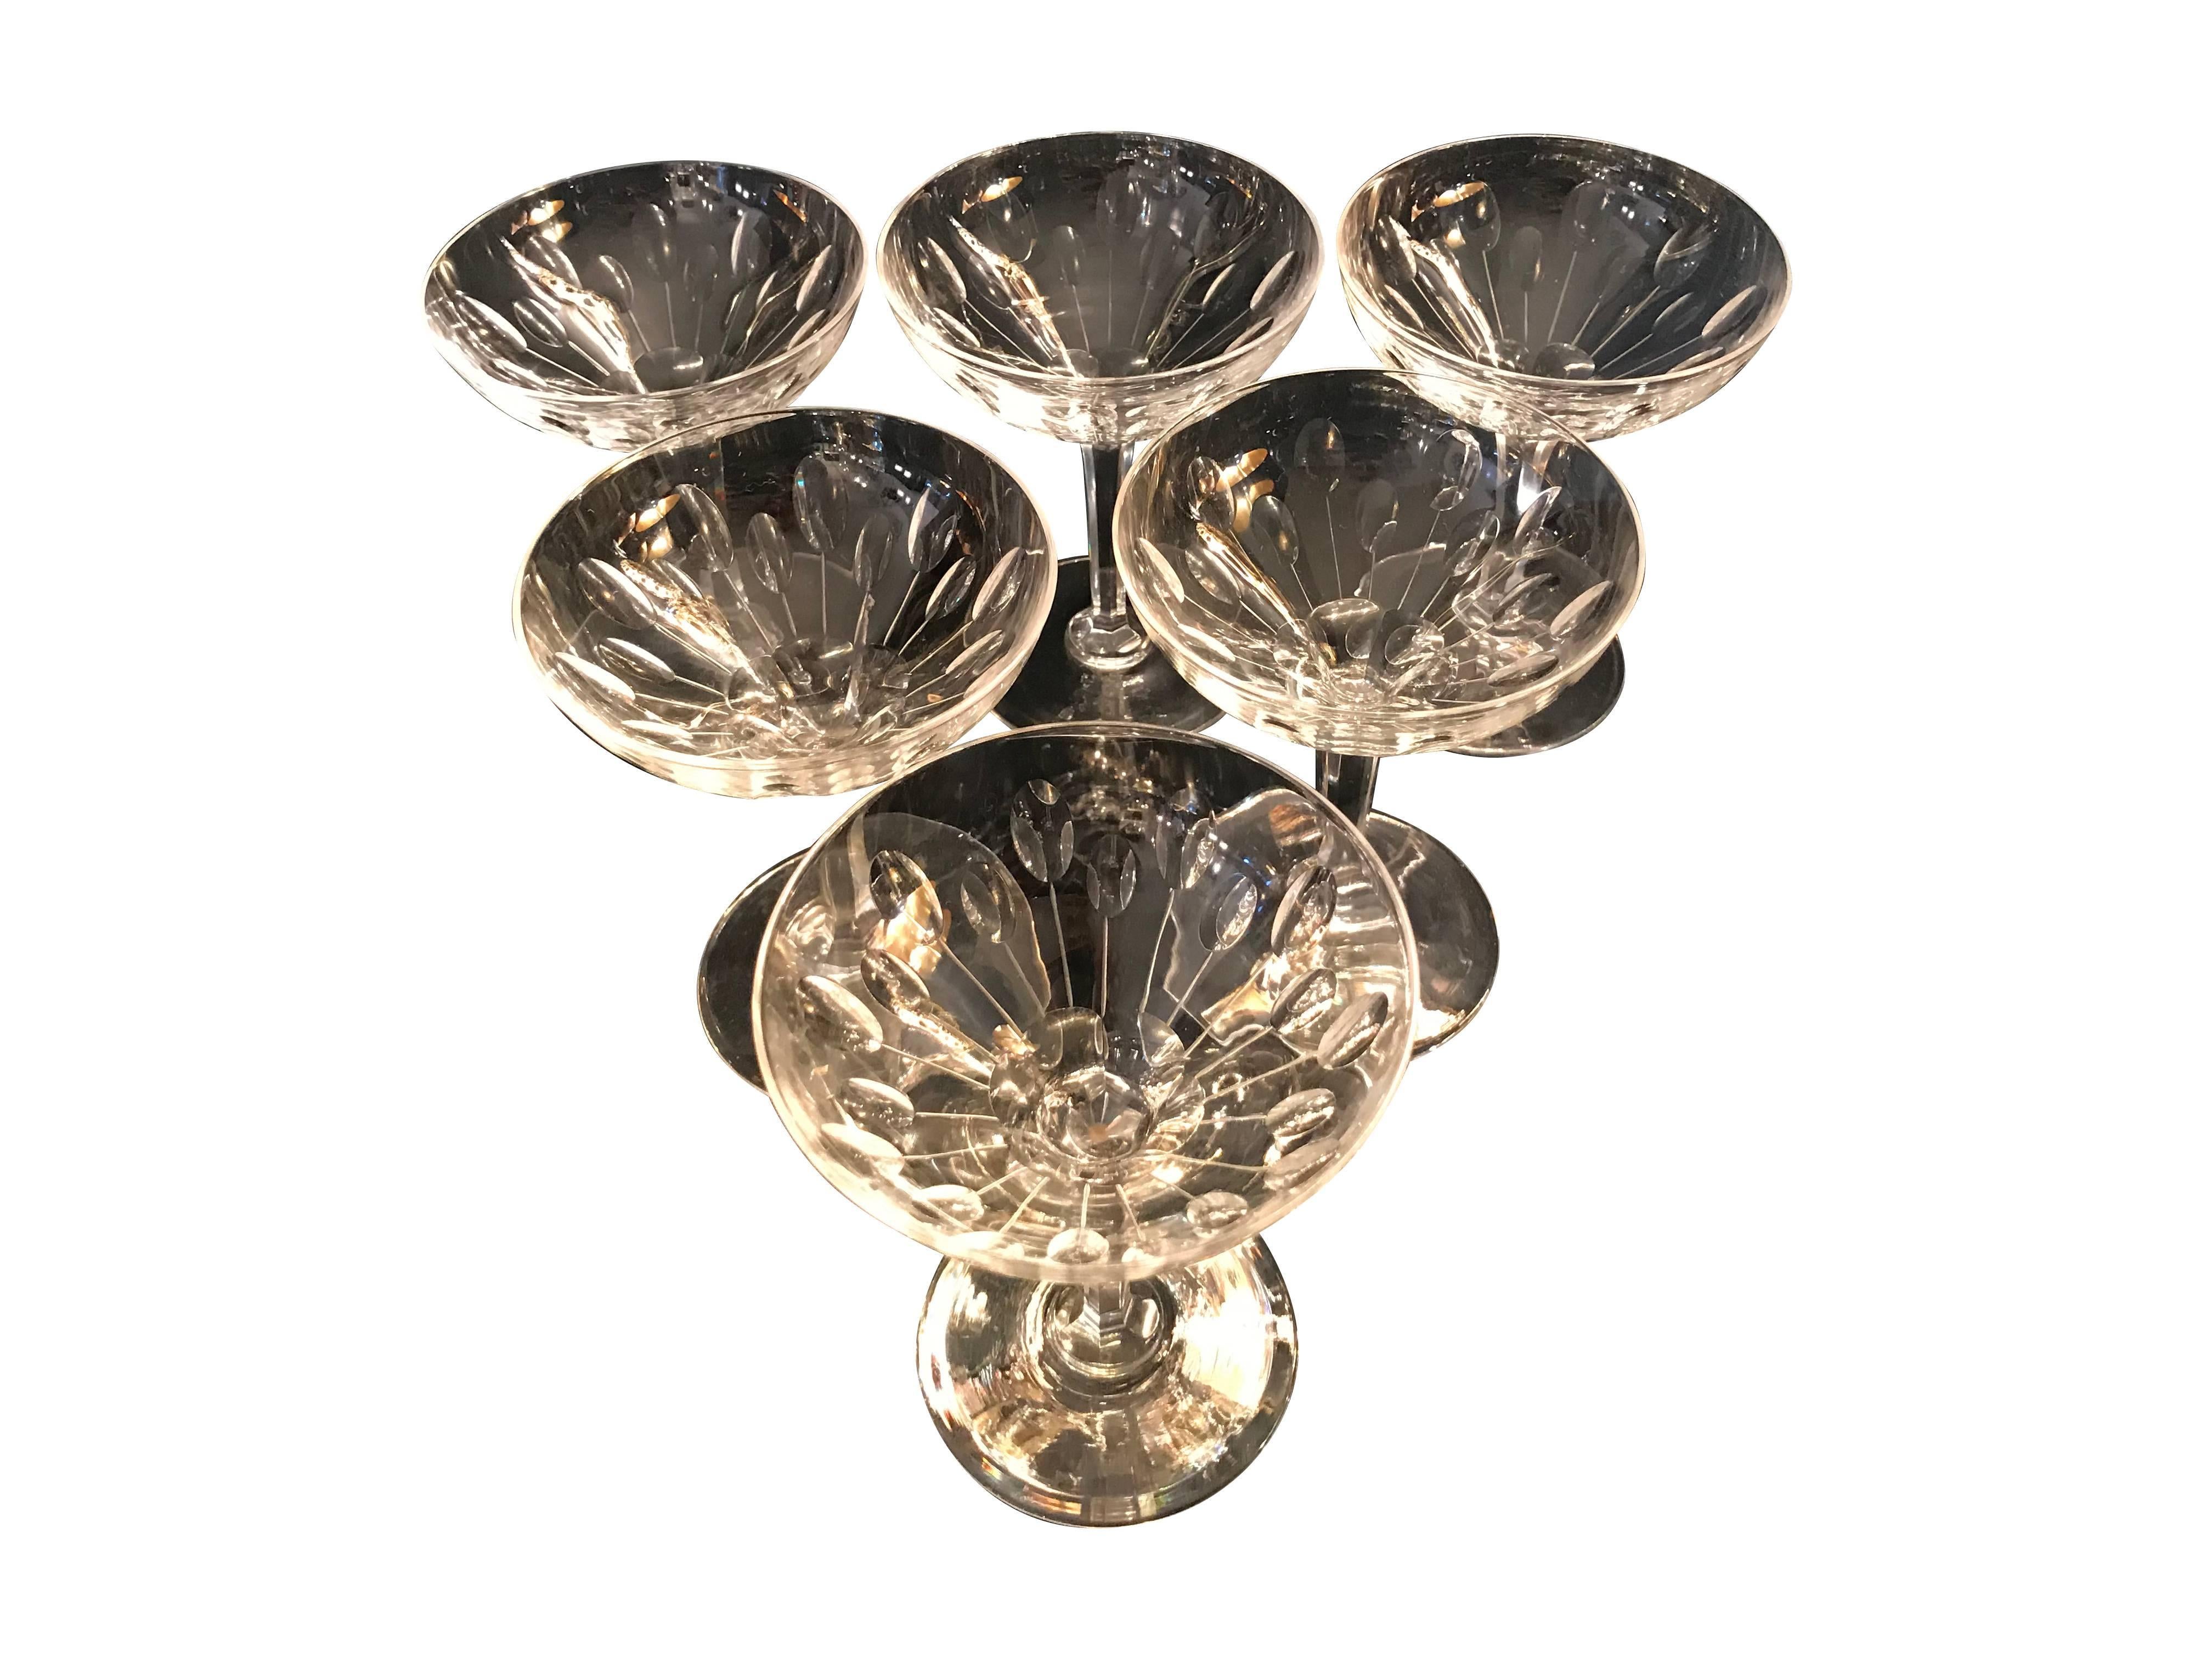 Val St Lambert "Nestor Hamlet" crystal cocktail / champagne glasses, with elegant geometric design on faceted stem. Superb quality, heavy coupe glasses in perfect condition. 16 available, minimum purchases is a pair.

 